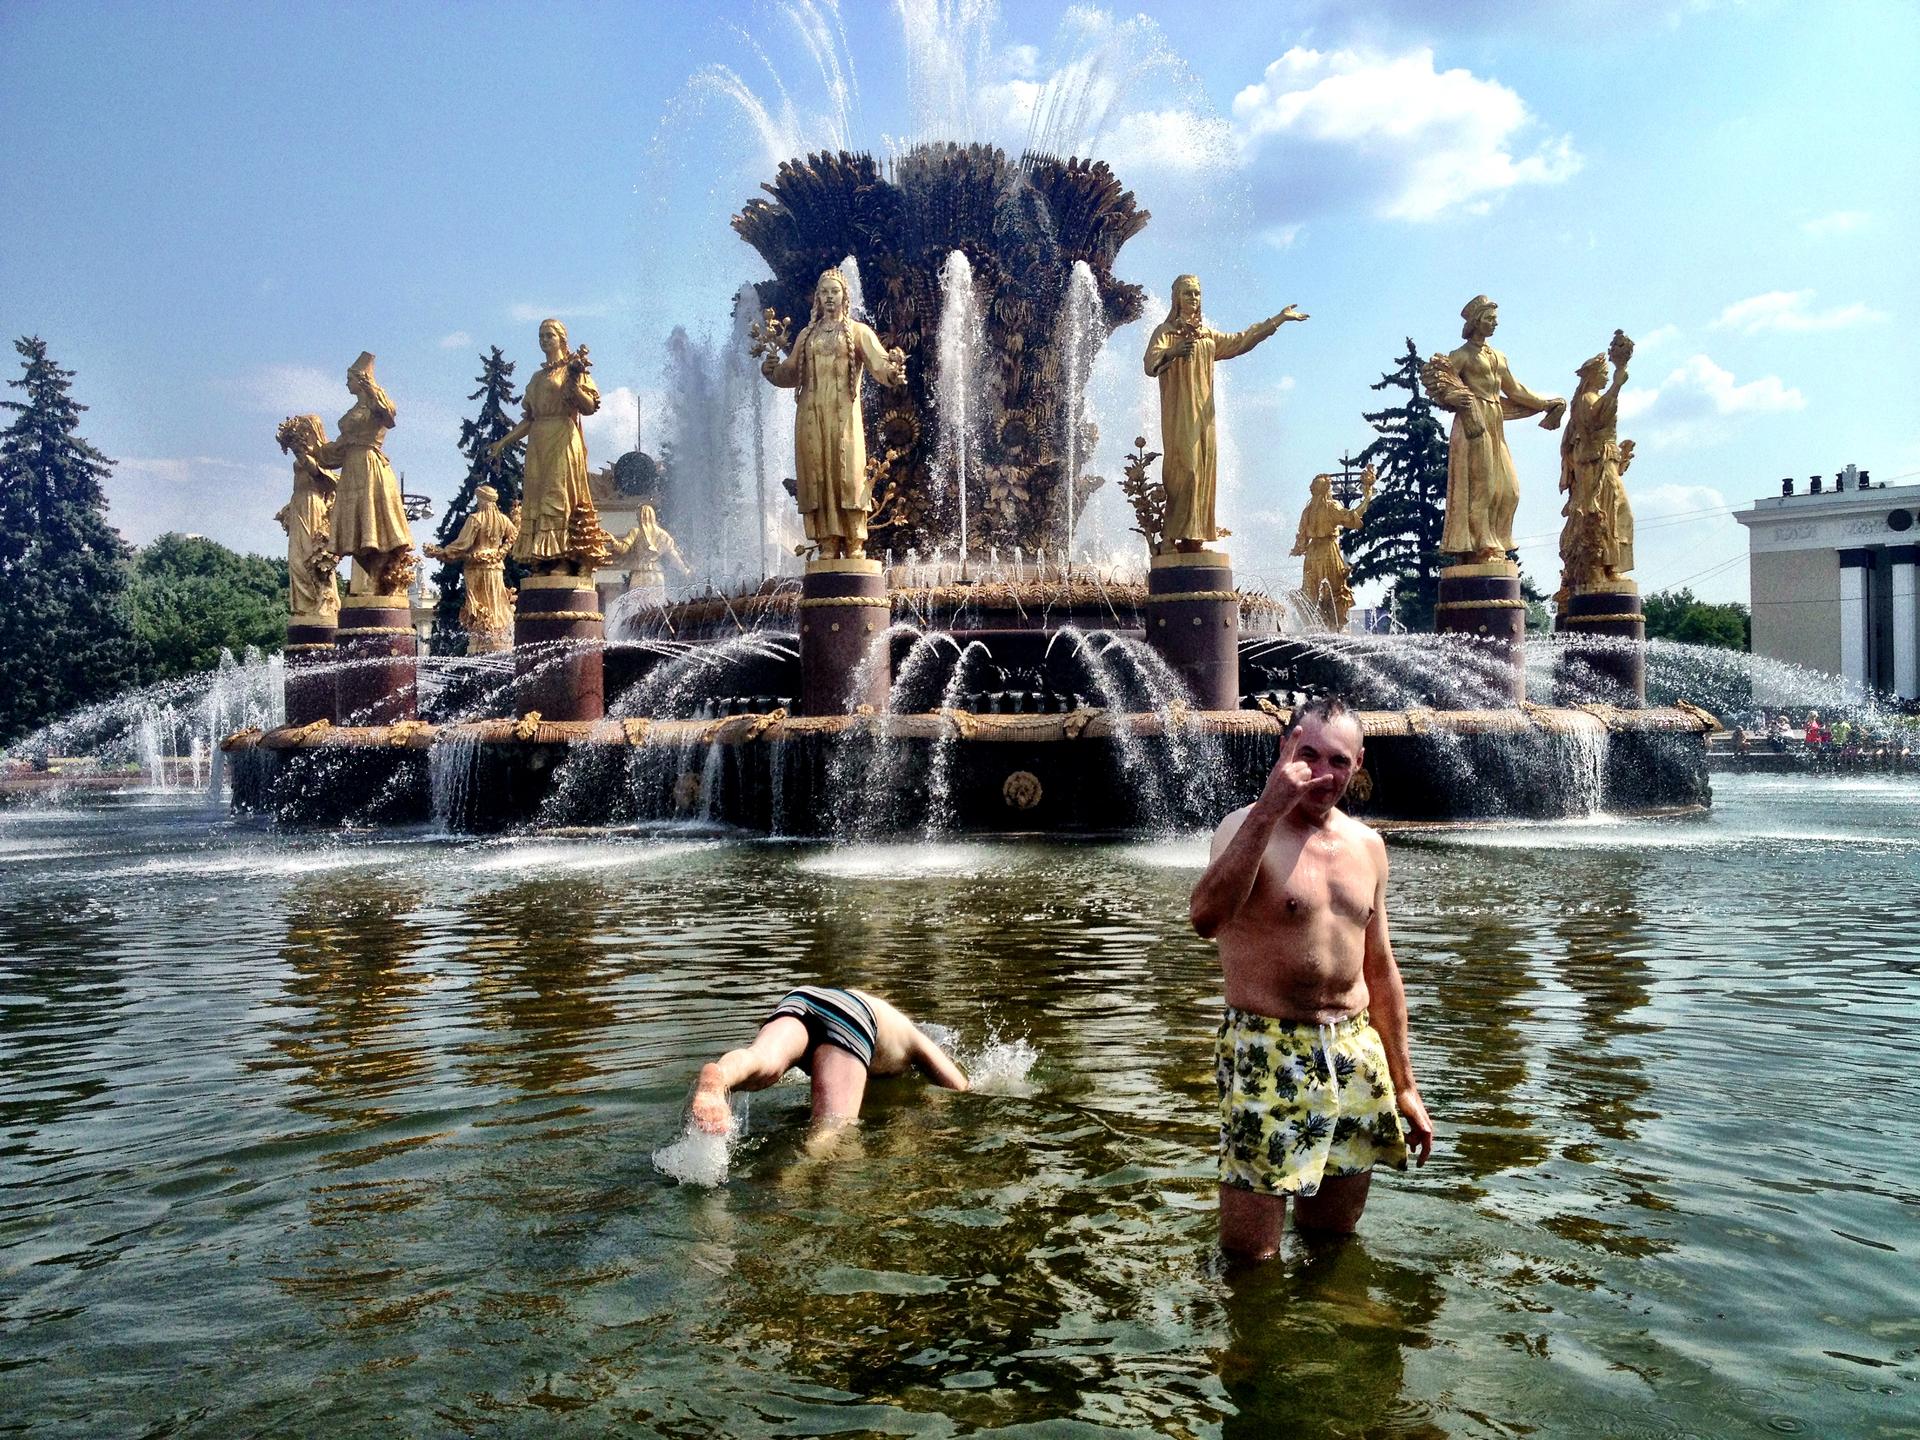 Two former Russian soldiers, Sevold (on the right) and Nikolai (diving), cooling off in a fountain in Moscow's VDNKh Park. Unlike many people in the park, these men expressed some concern about the impact of the new round of sanctions against Russia.  But